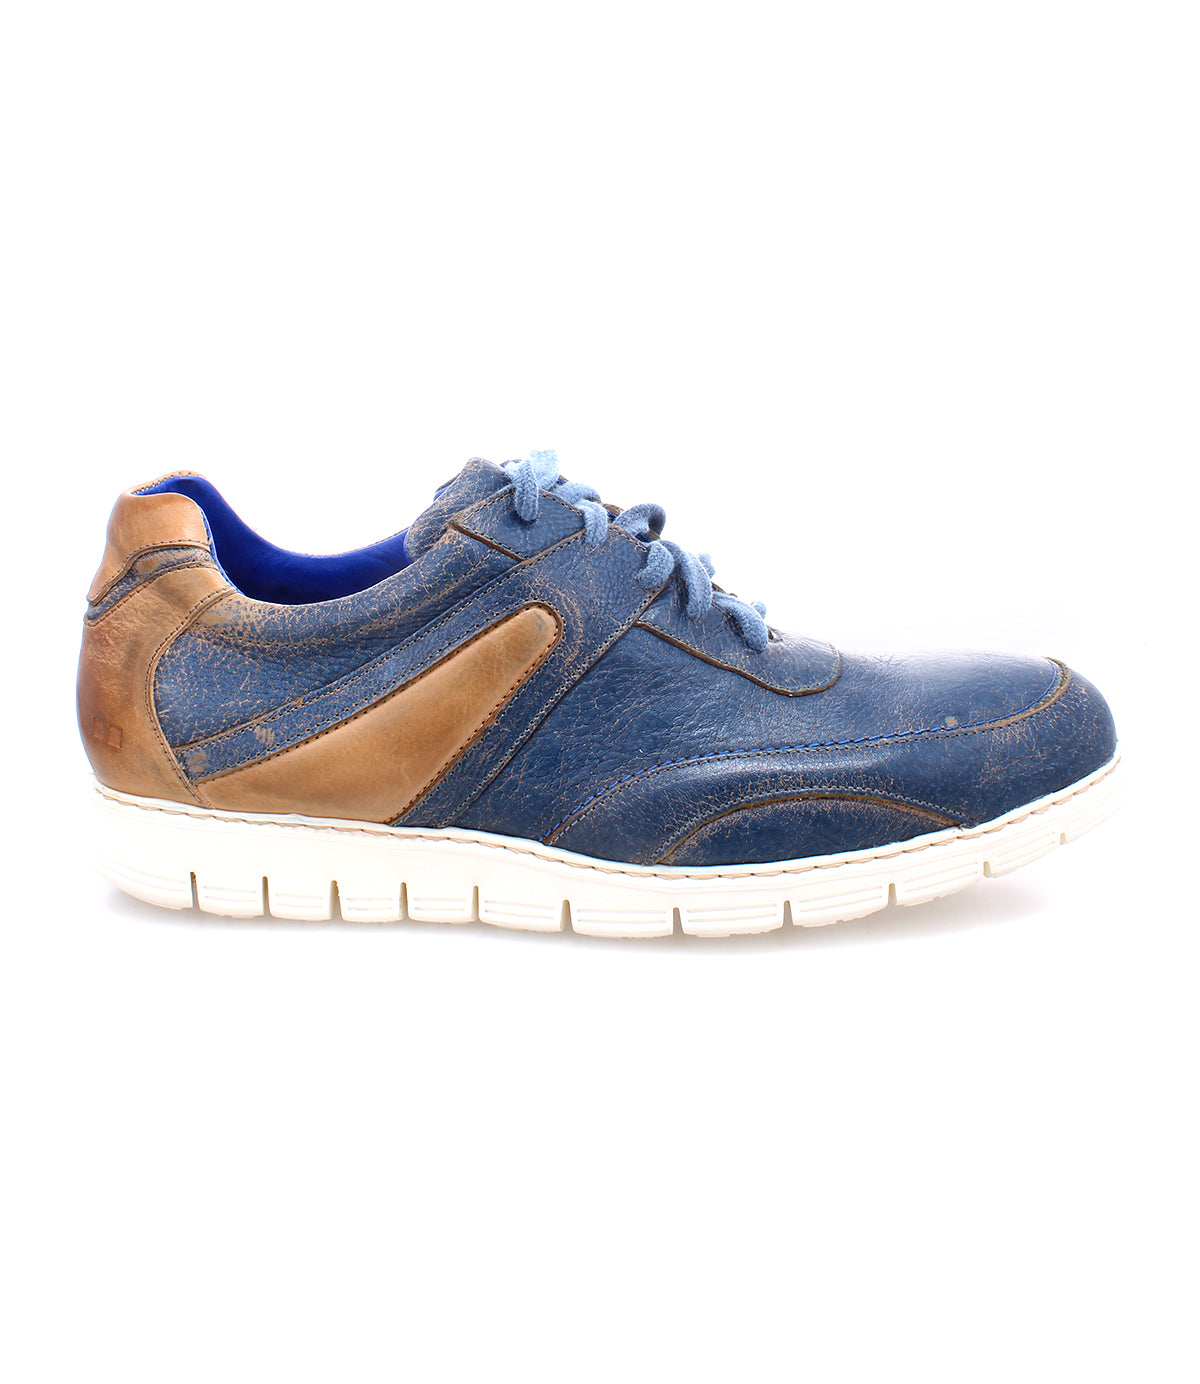 A lightweight men's Wardell blue and tan leather sneaker with a distressed lace-up outsole by Bed Stu.